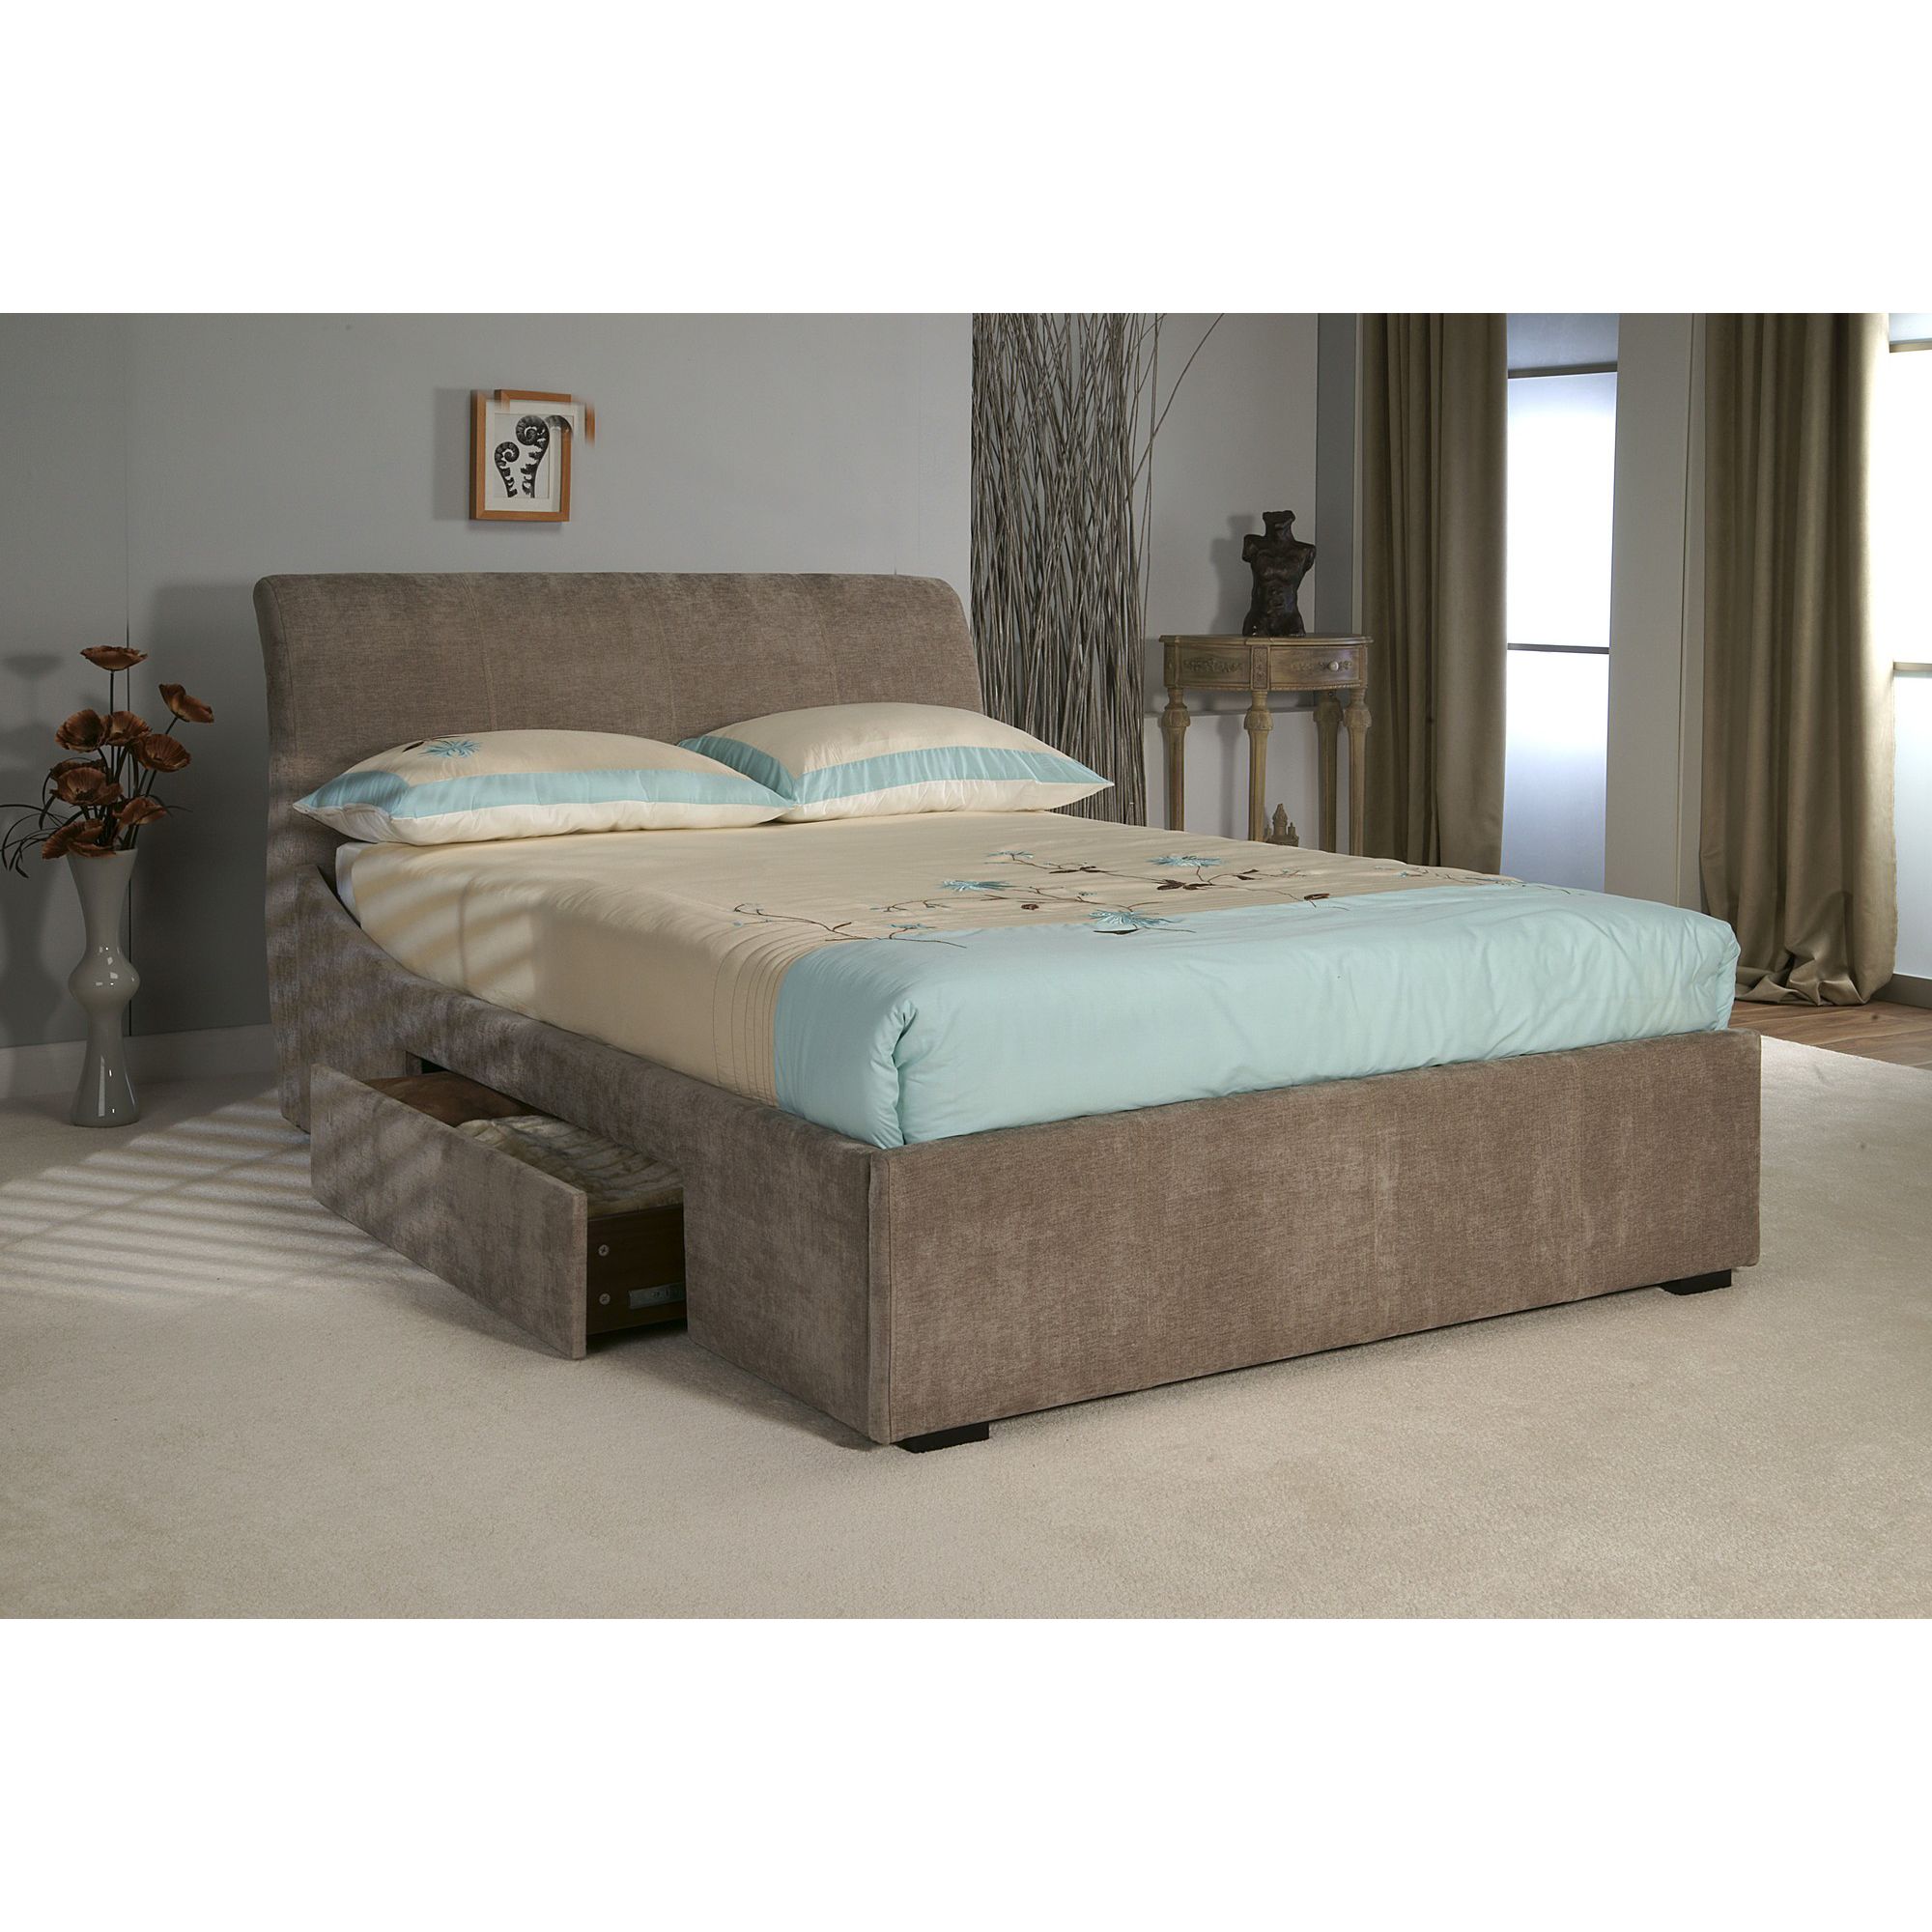 Limelight Oberon Bedstead with Storage - Double at Tesco Direct